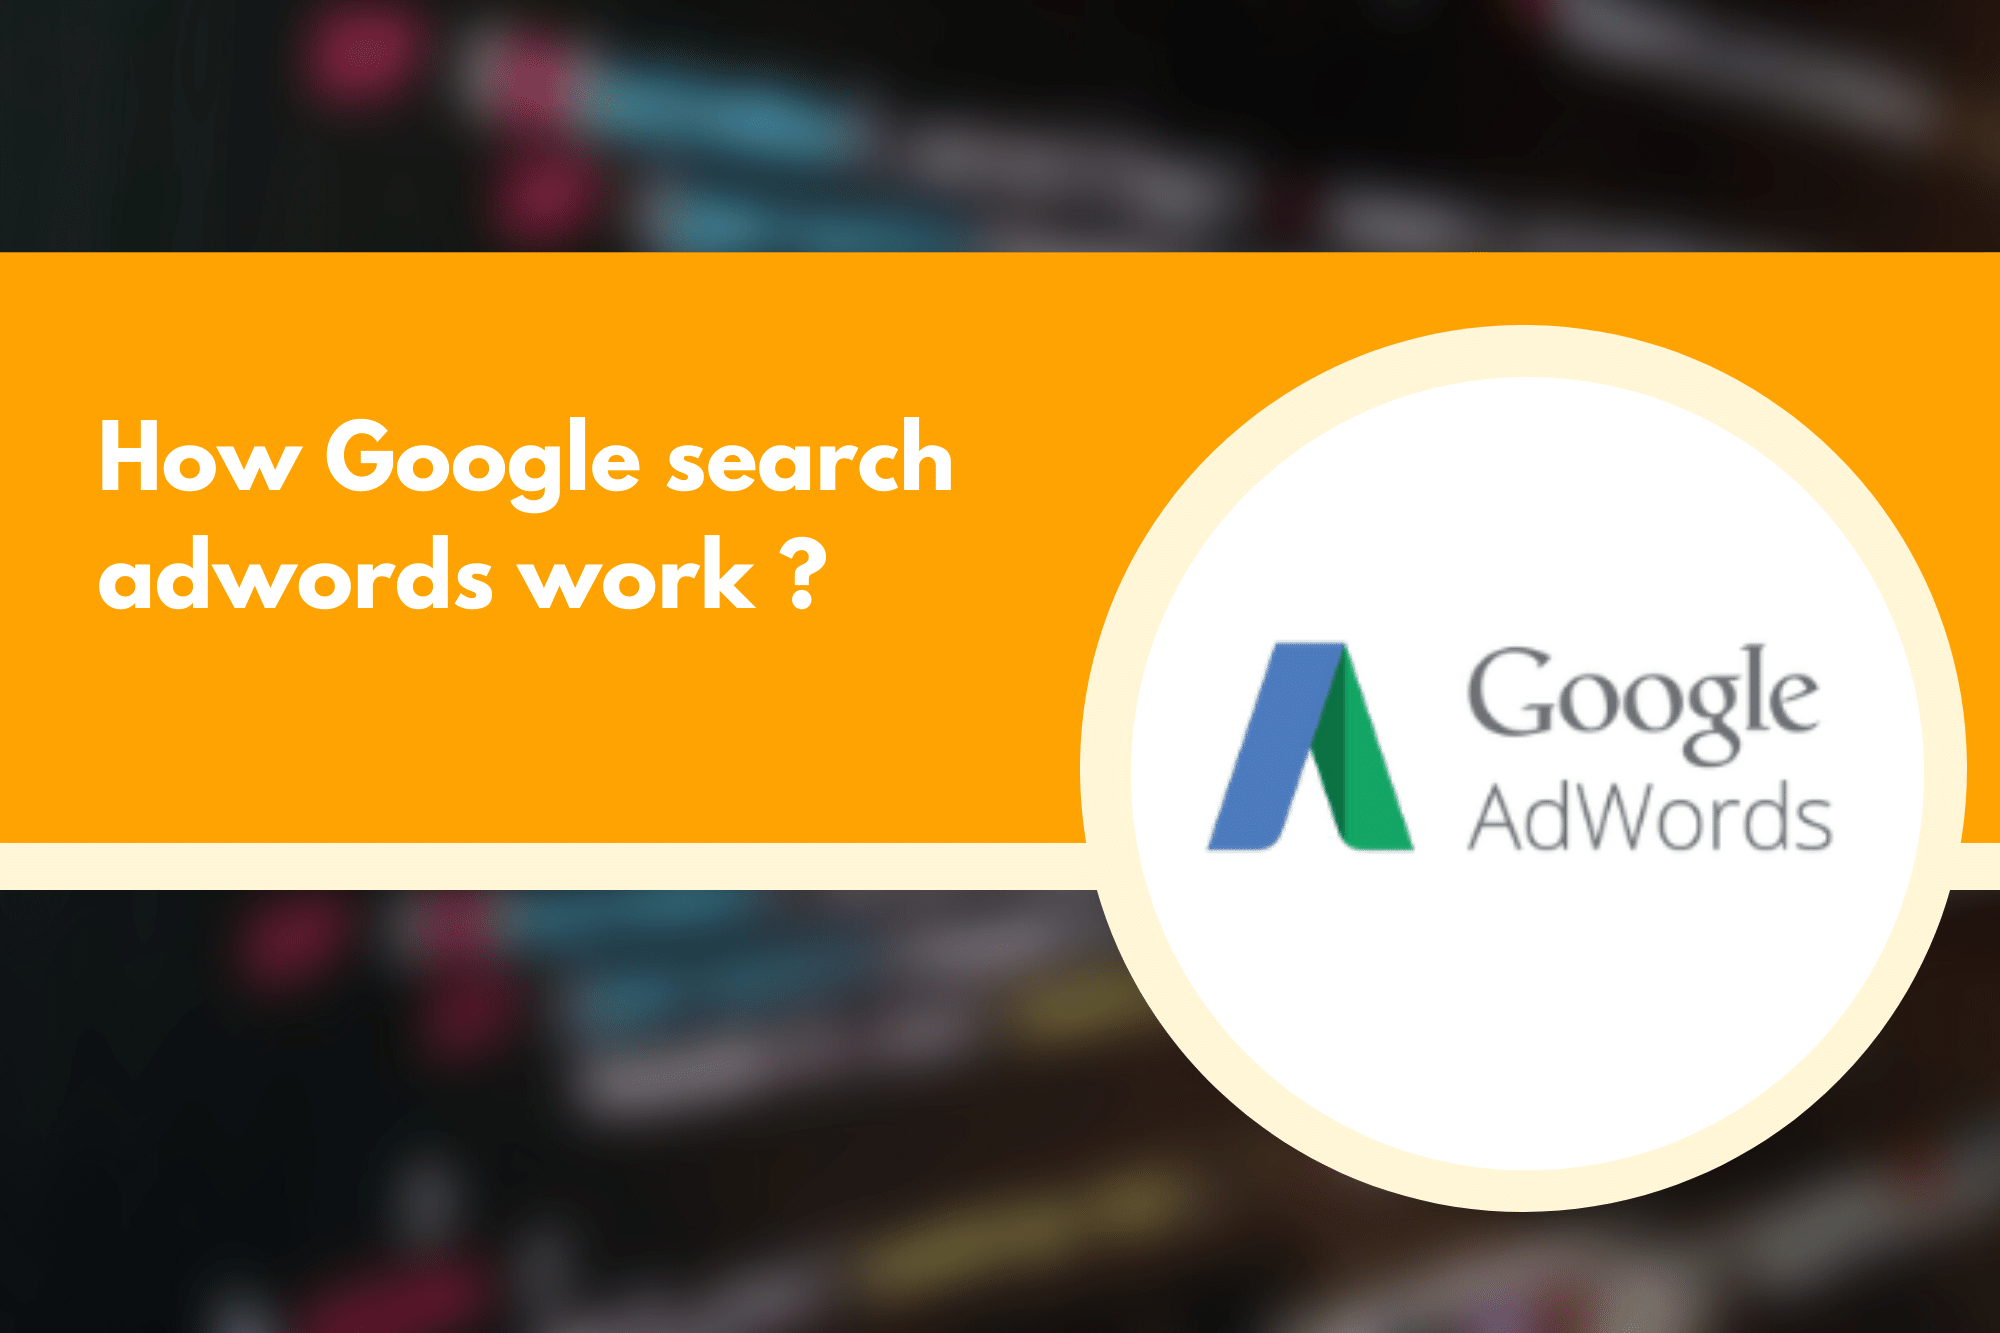 How Google search adwords work